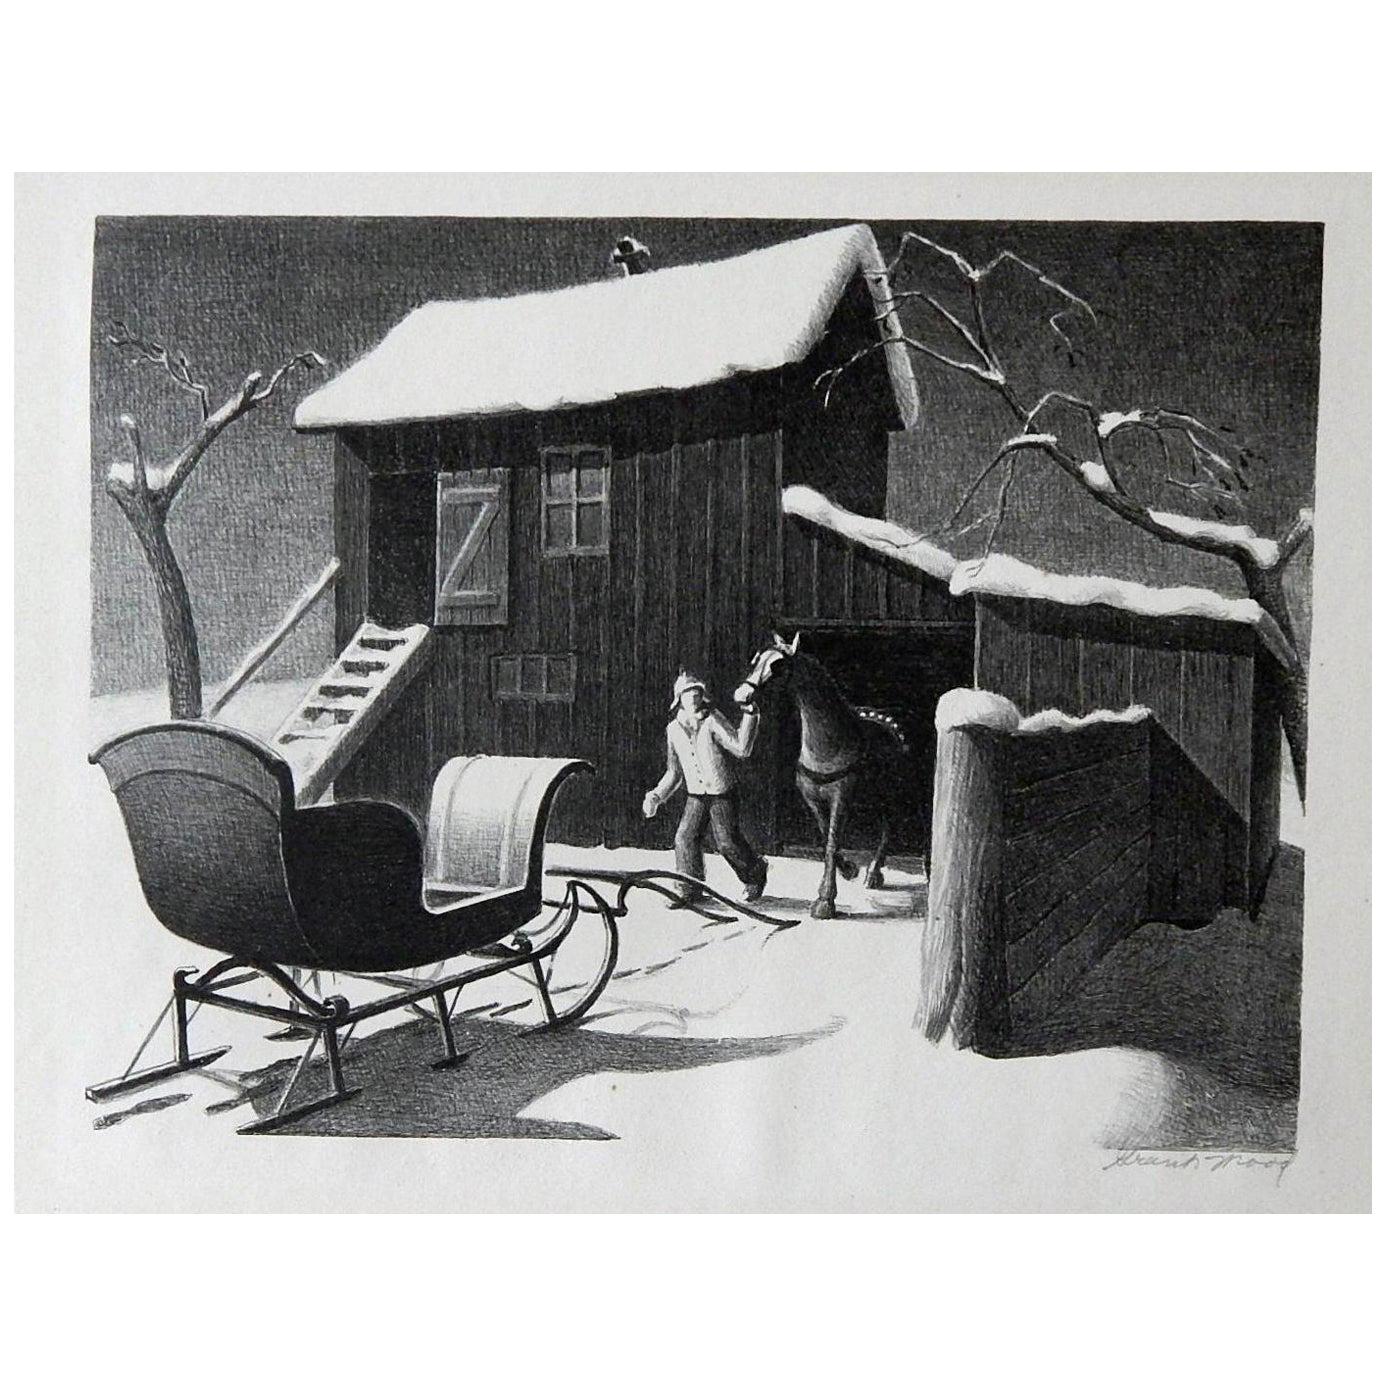 Grant Wood Original Stone Lithograph, 1940, “December Afternoon”